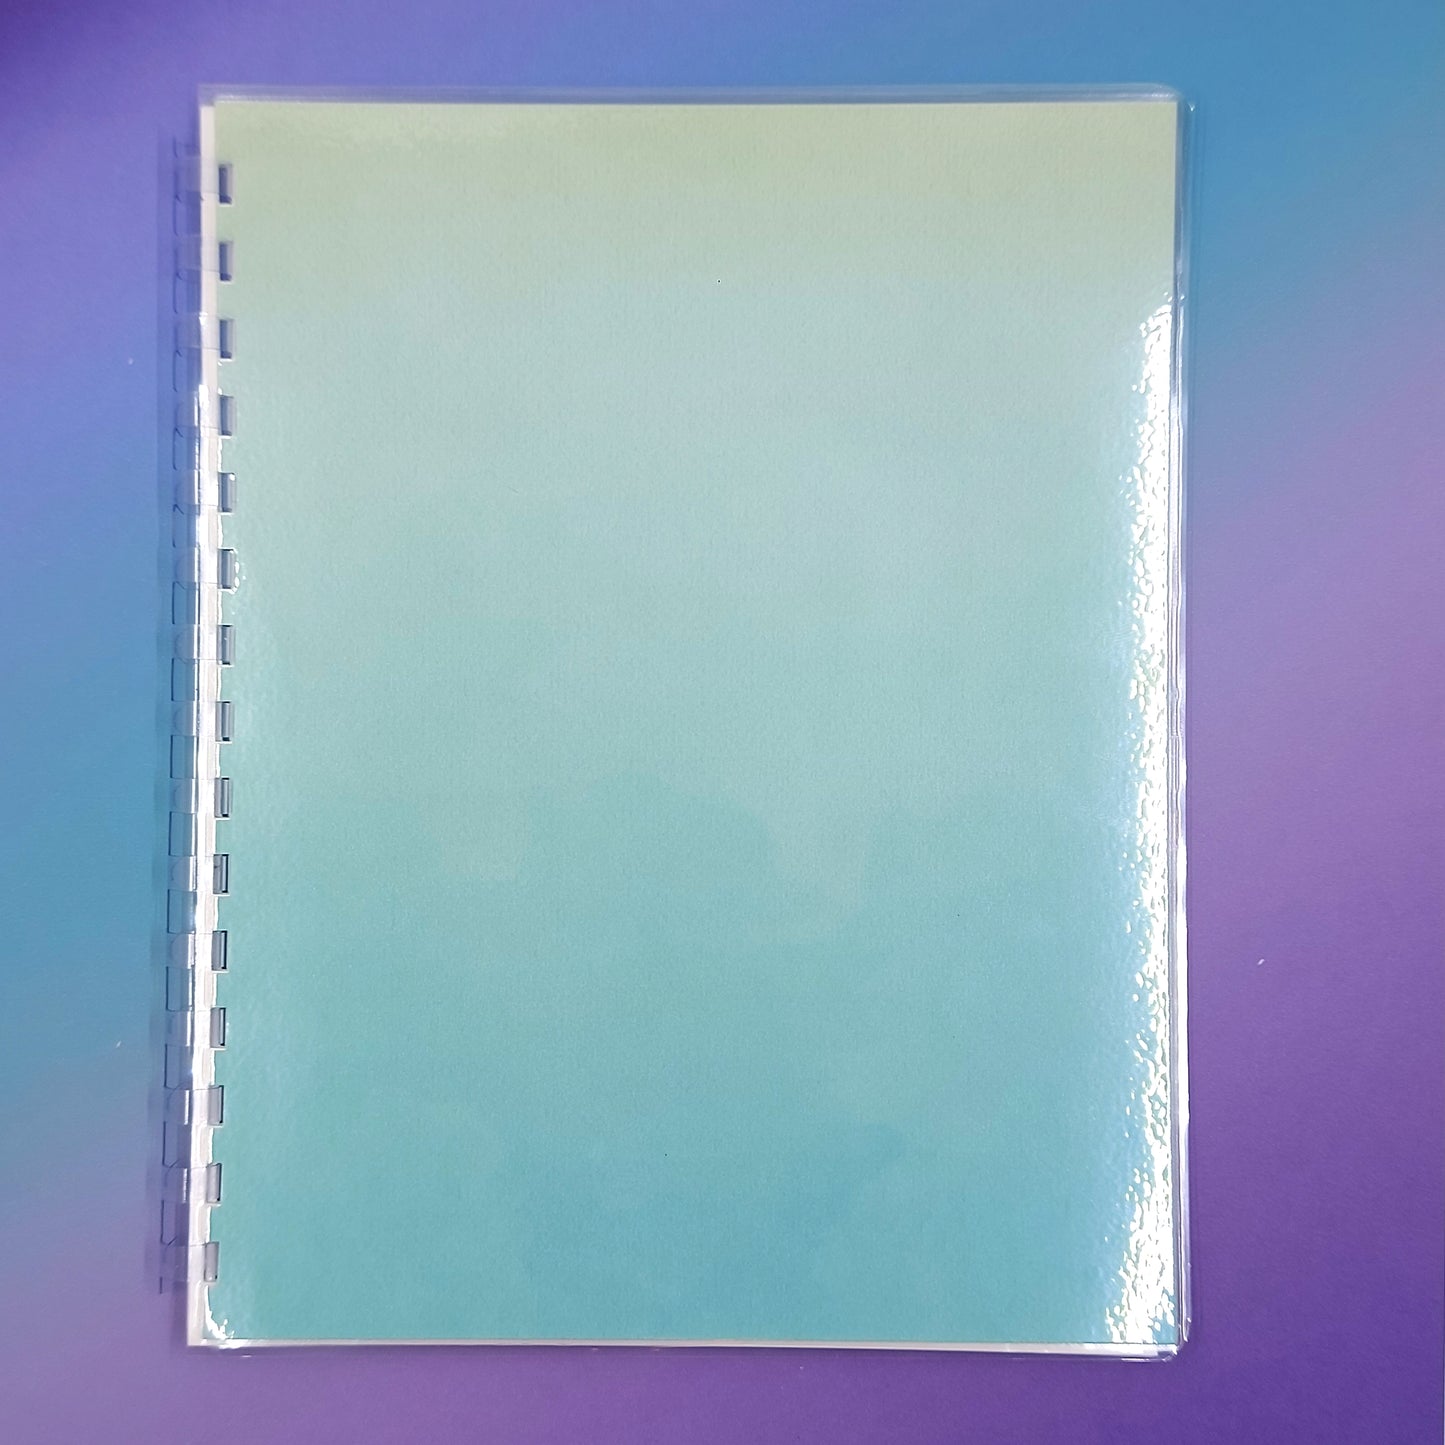 Large 7x9 Reusable Sticker Storage Book - Blue/Green Ombre